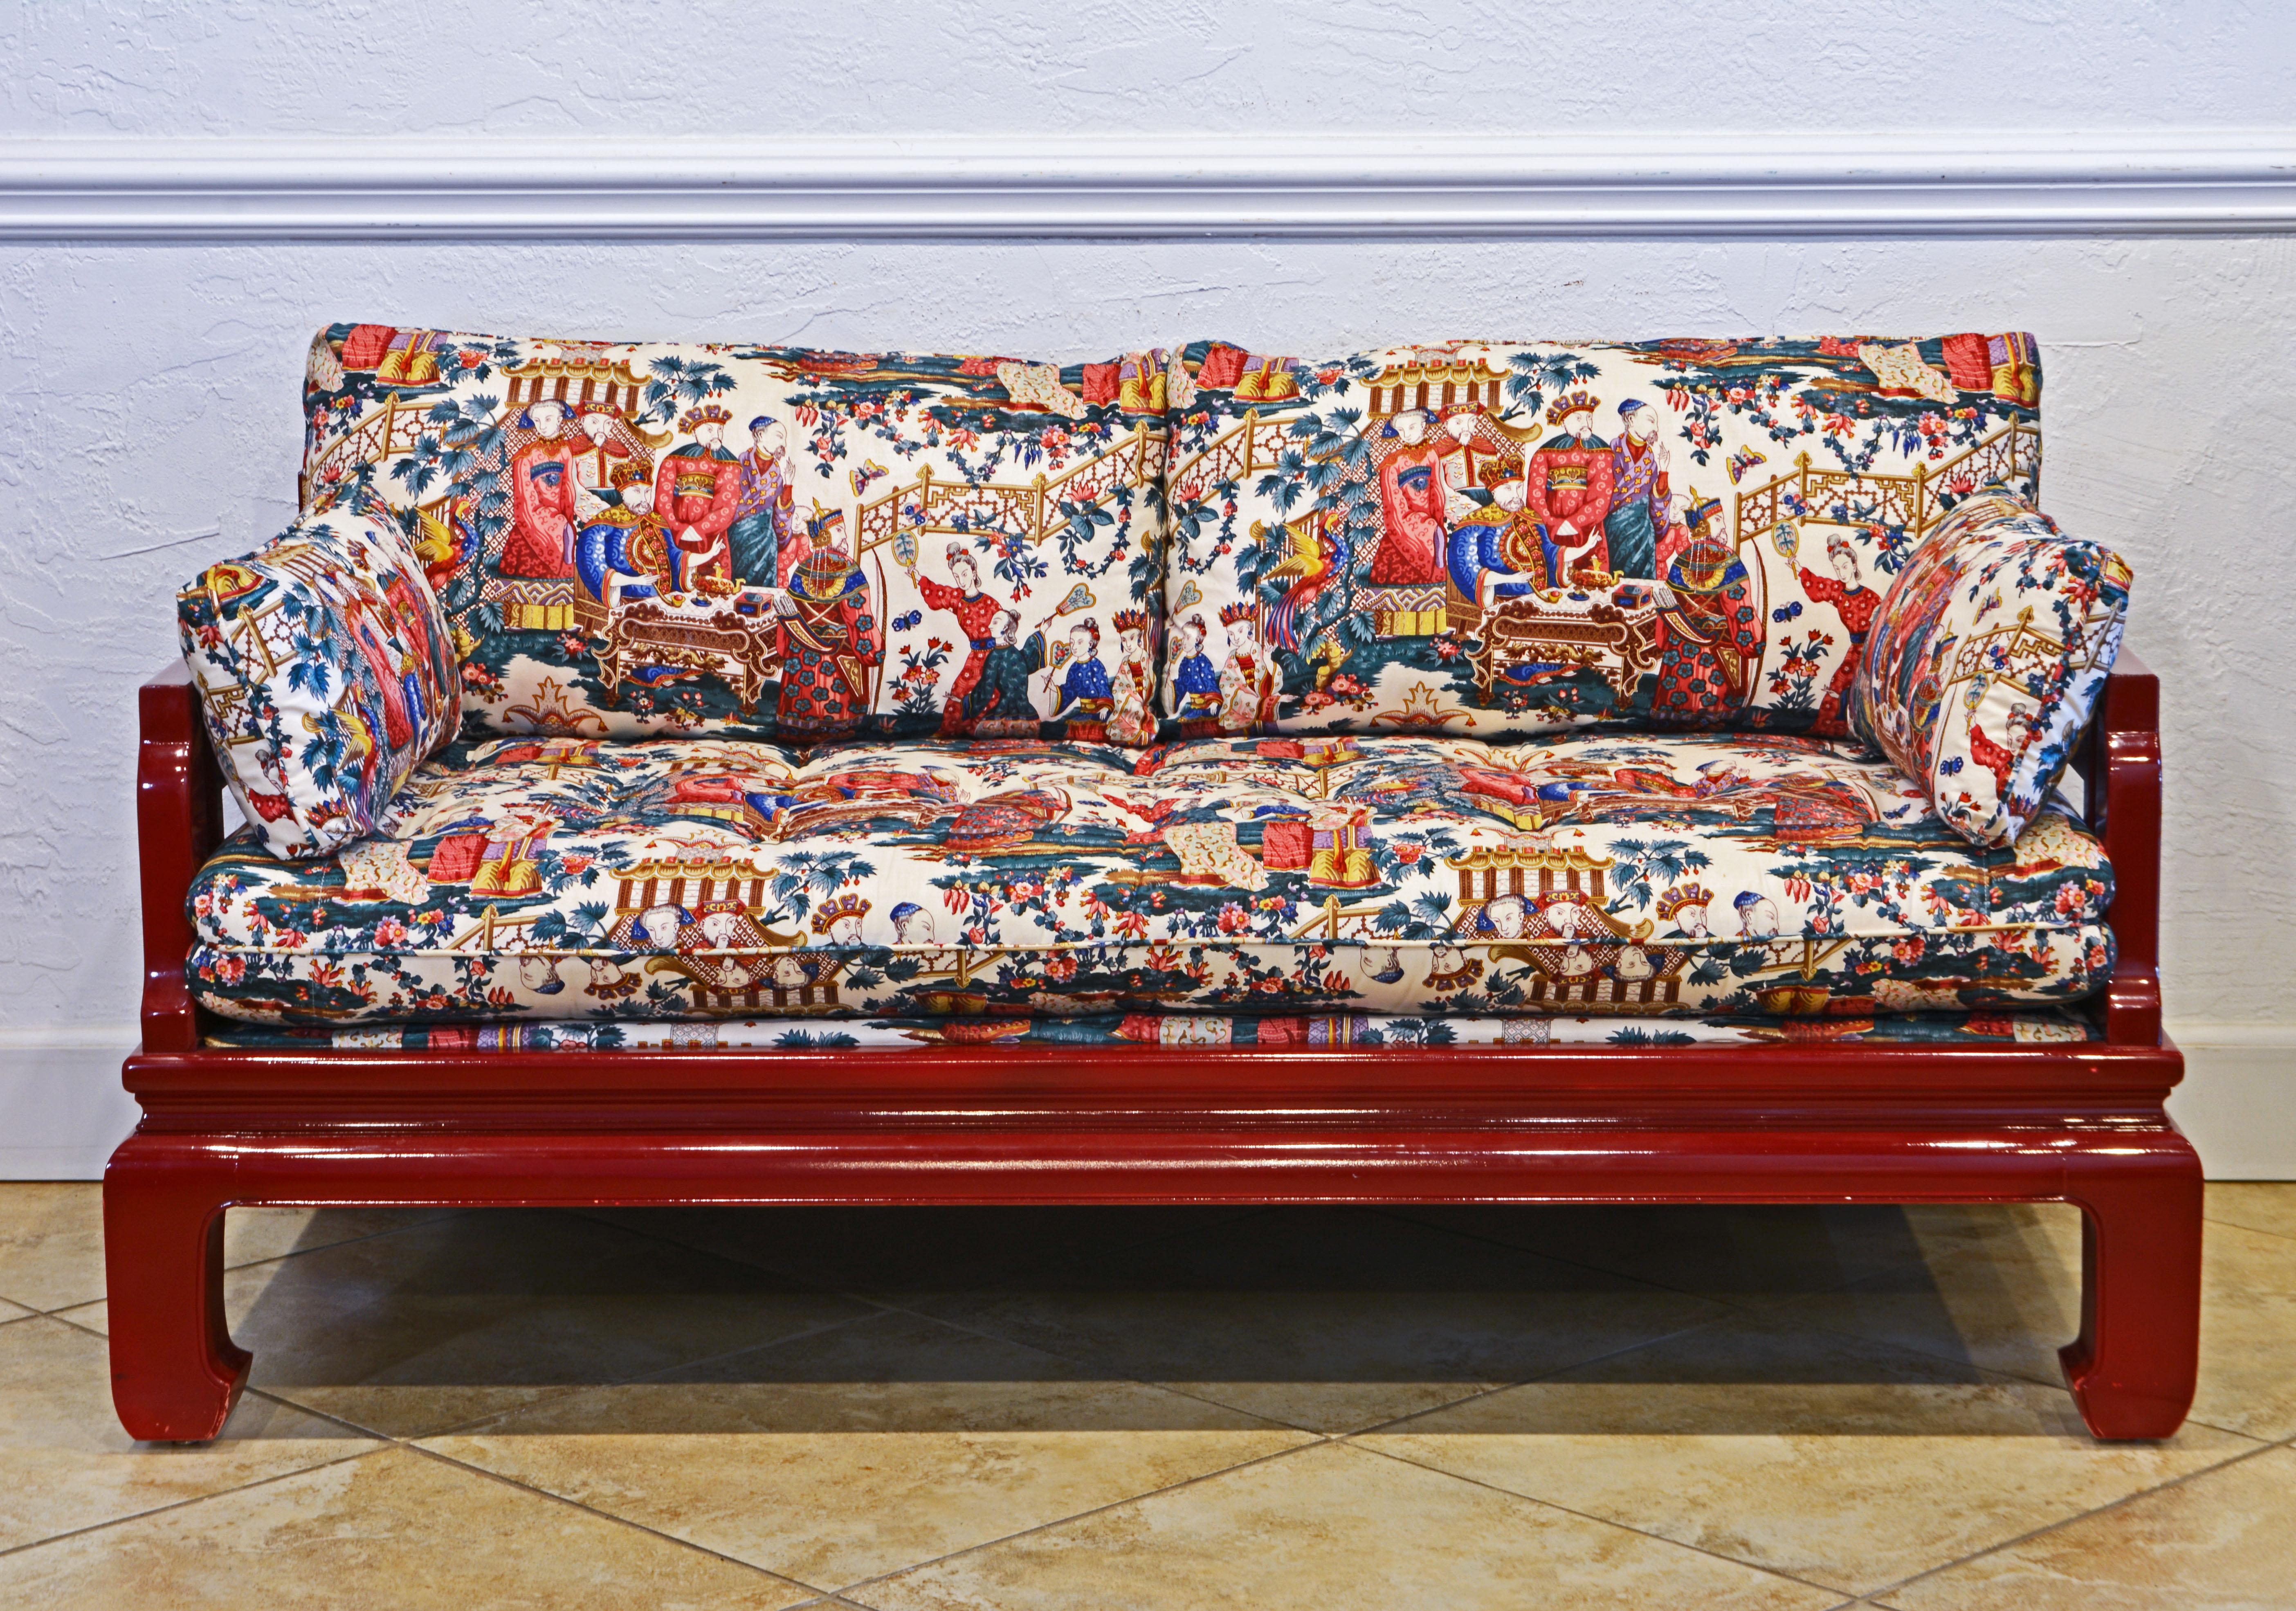 This good looking sofa adds life and a sense of joy to an interior. The red lacquered hardwood construction is fashioned in the old Chine Ming style and the first class quality upholstery and fabric with an abundance of Chinese courtiers and the